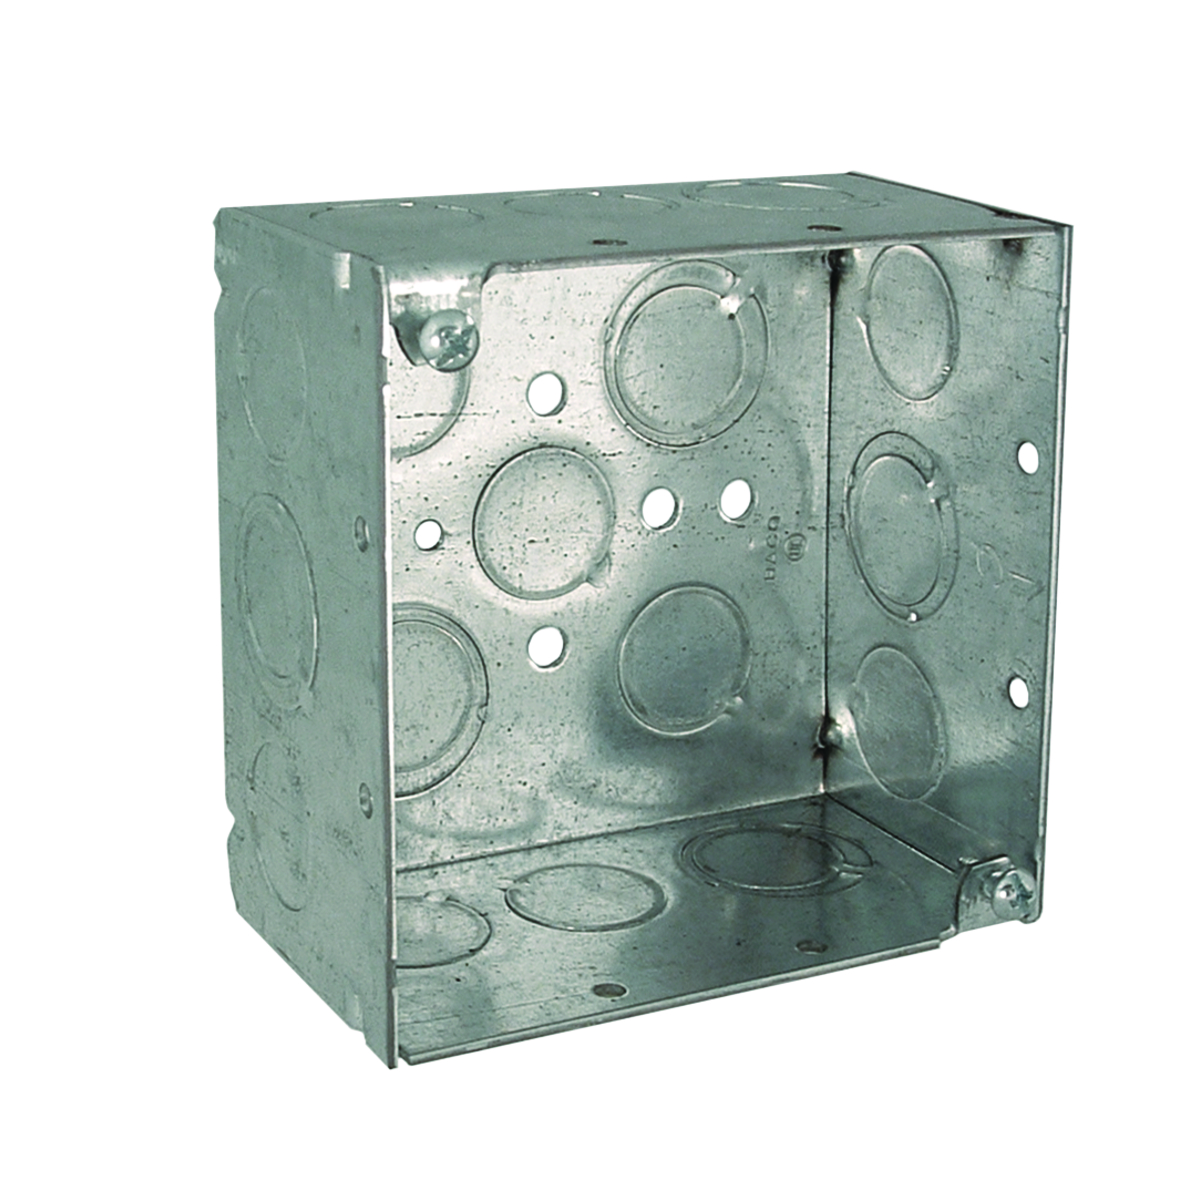 4 In. Square Boxes, 2-1/8 In. Deep - Welded with Conduit KO's, 600V